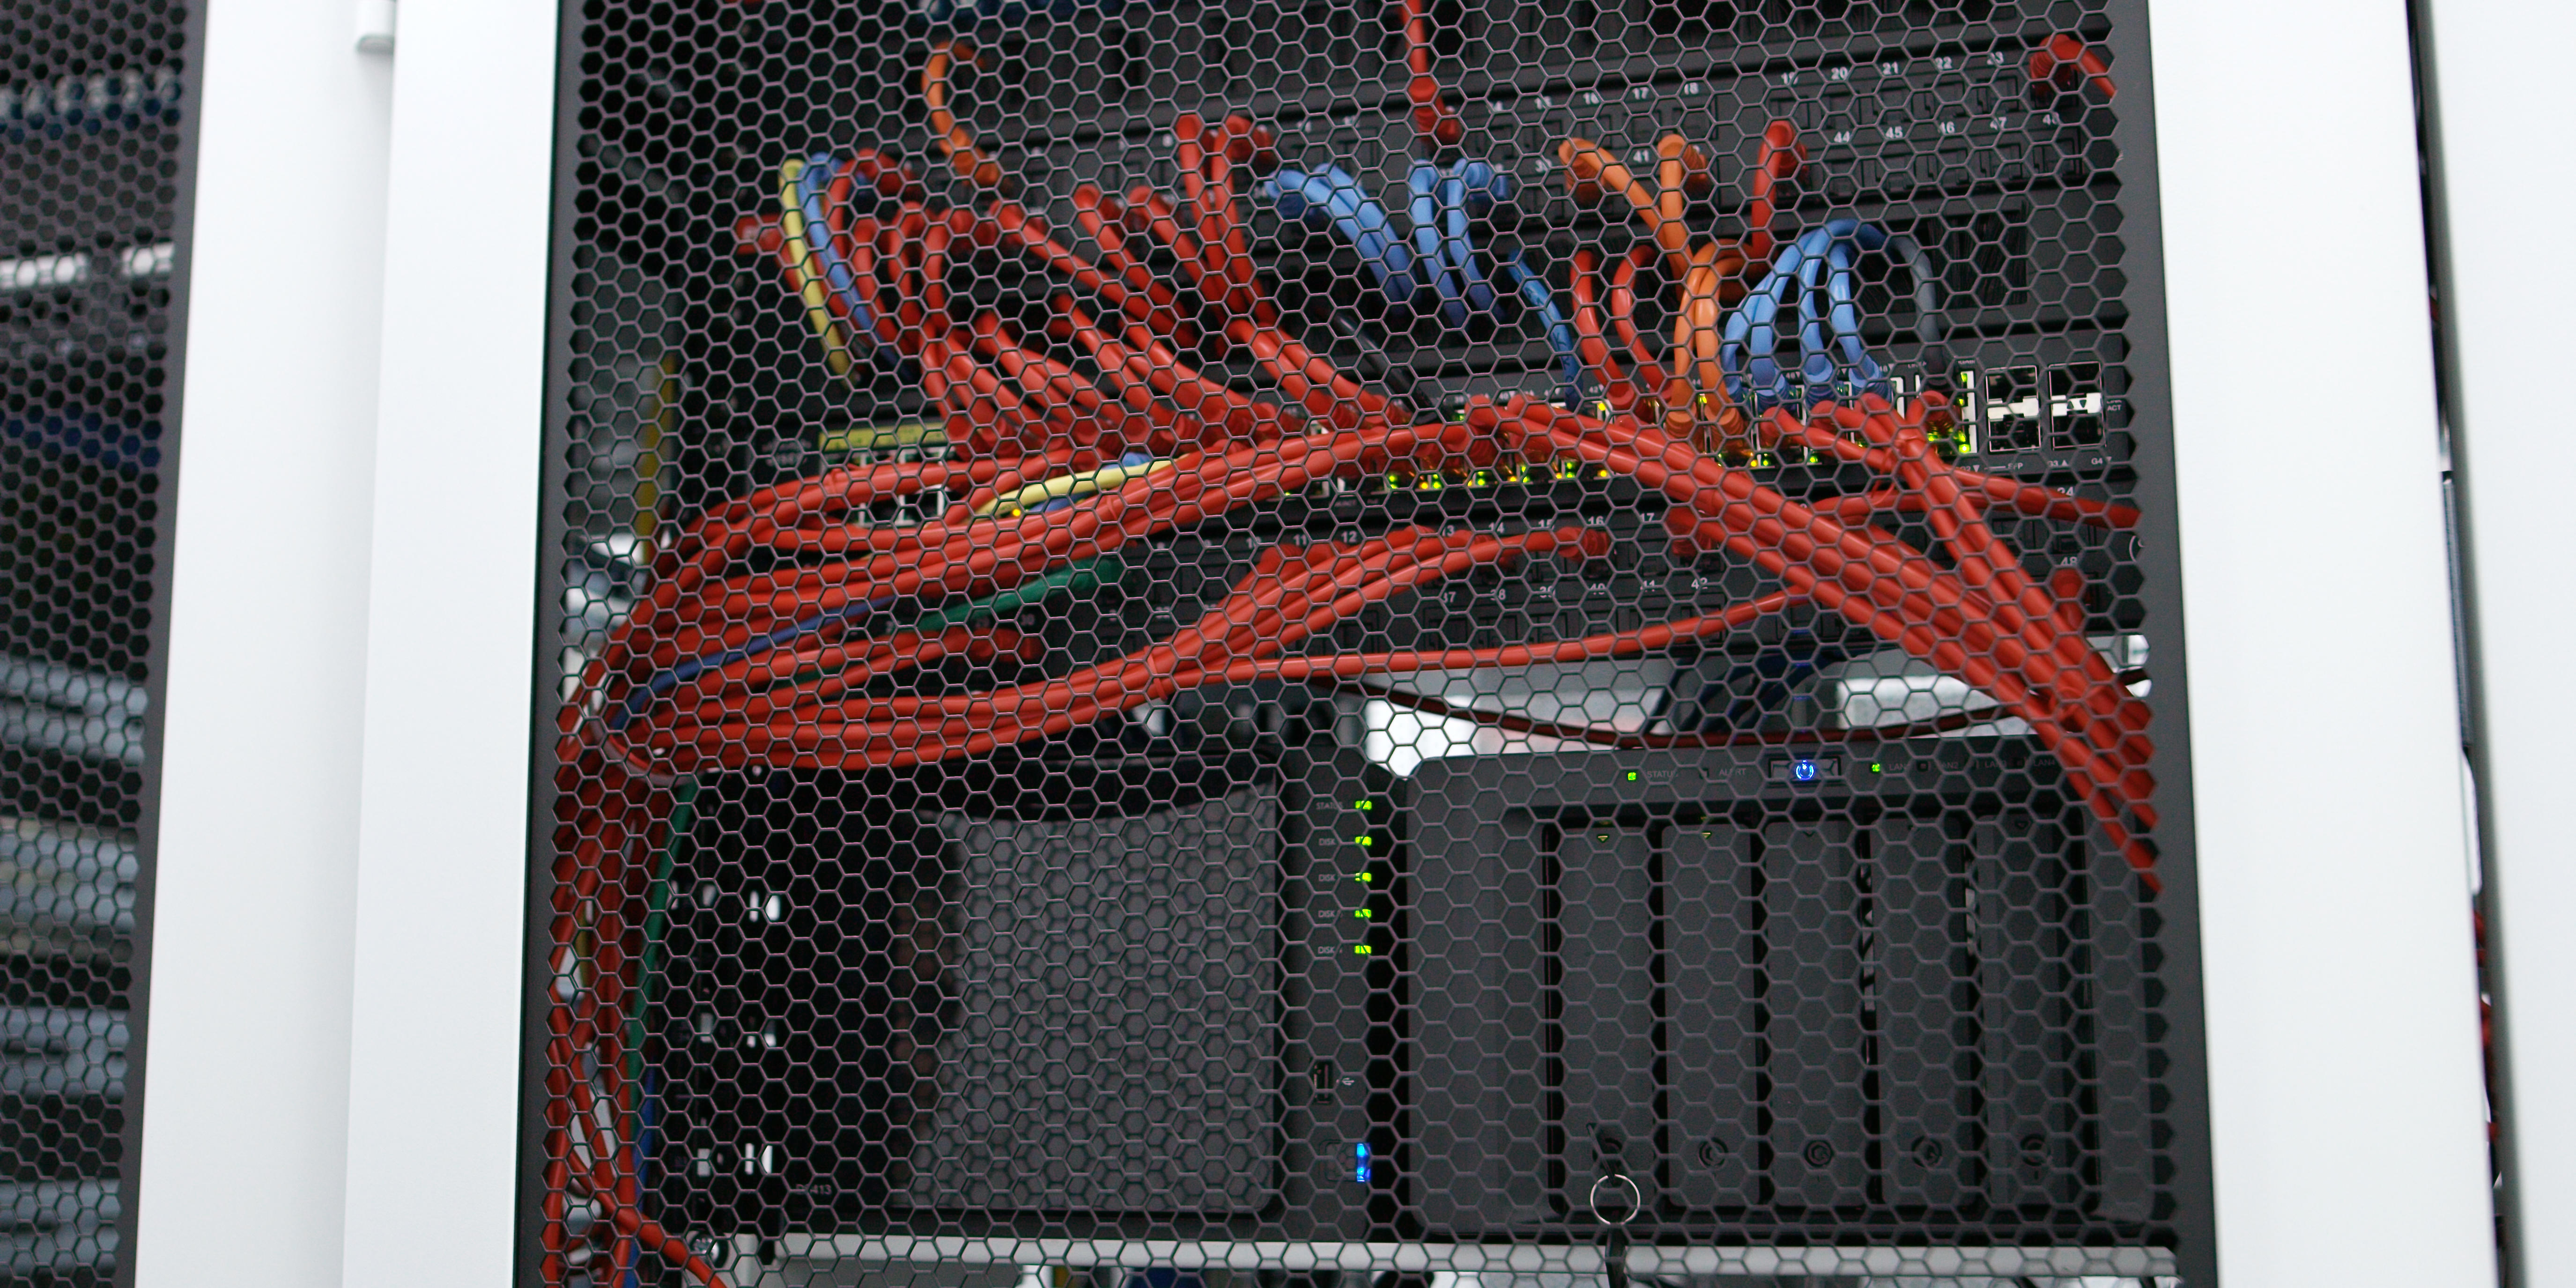 The back of a server and wires in a communications closet.